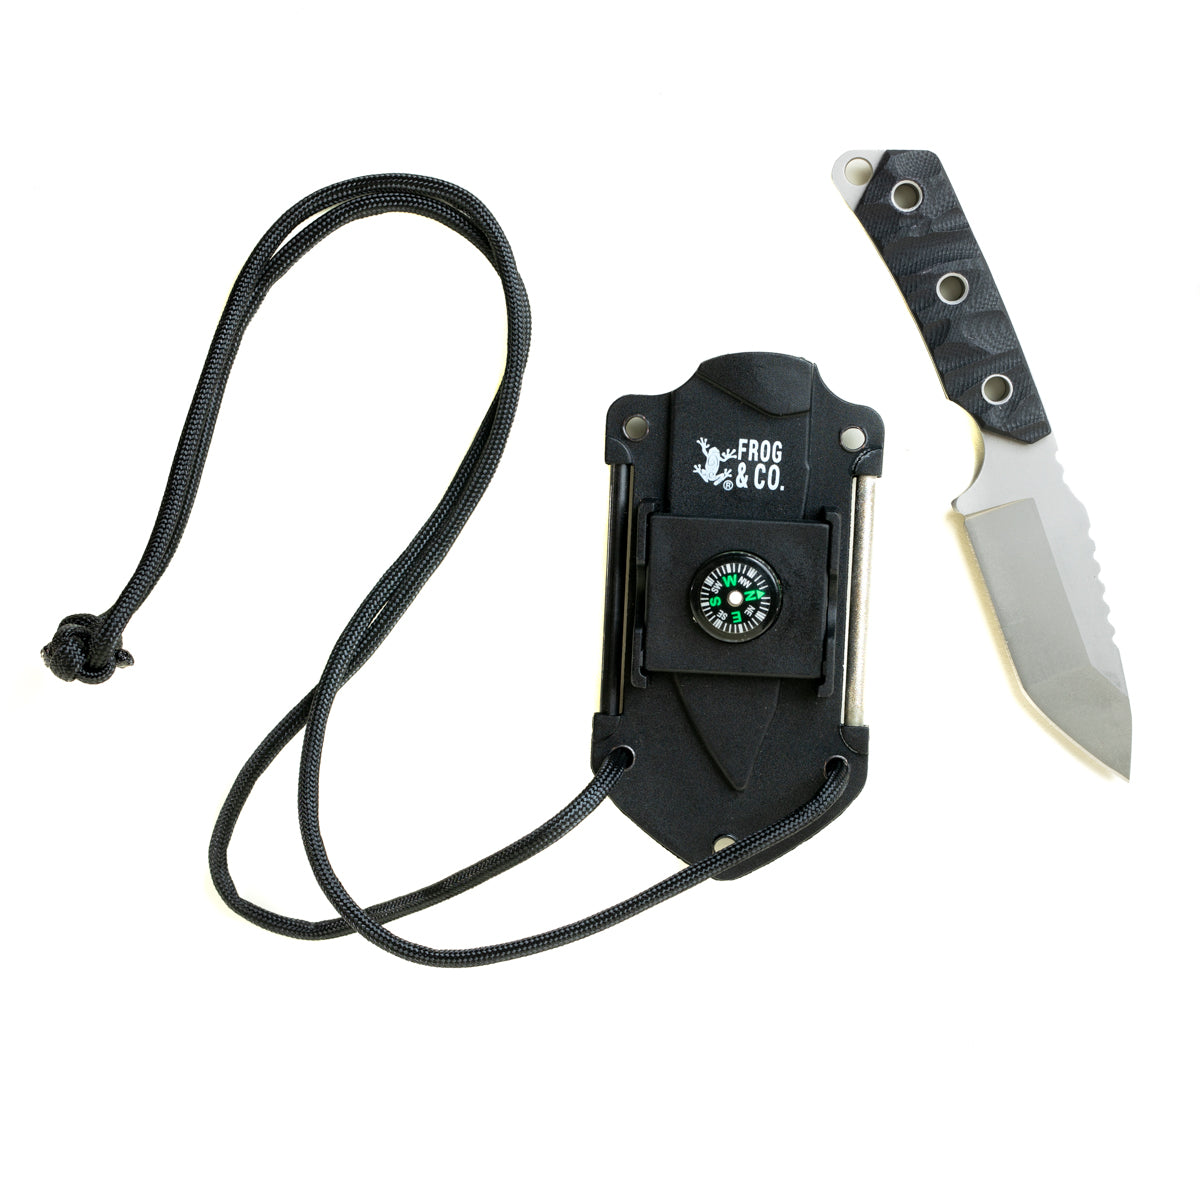 Neck knife with lanyard and knife outside of sheath